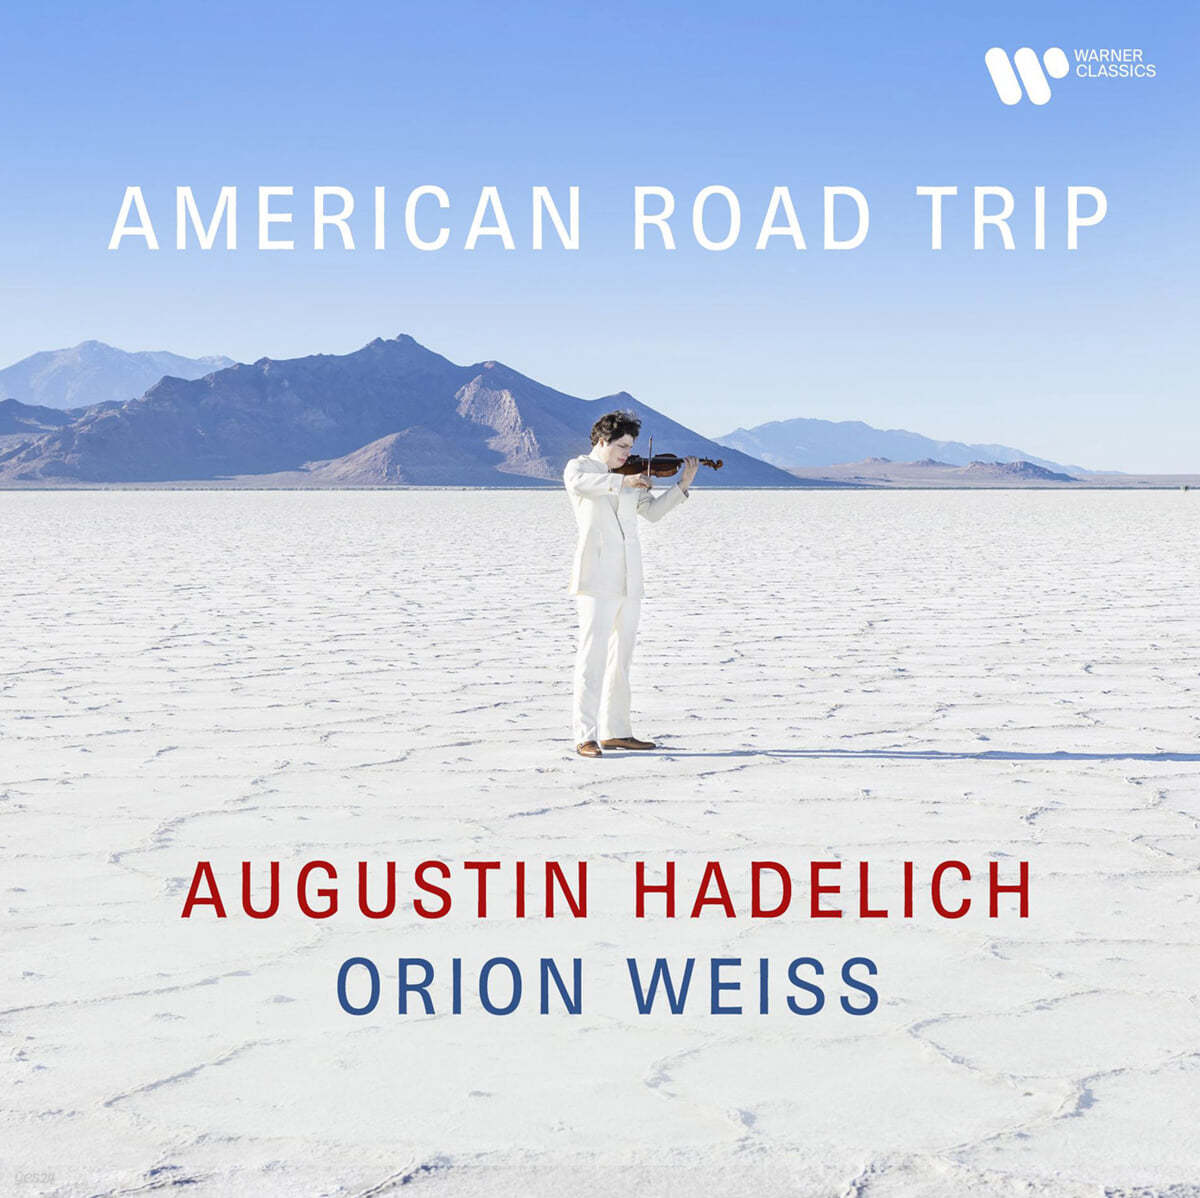 Augustin Hadelich / Orion Weiss 아메리칸 바이올린 여행 (American Road Trip)